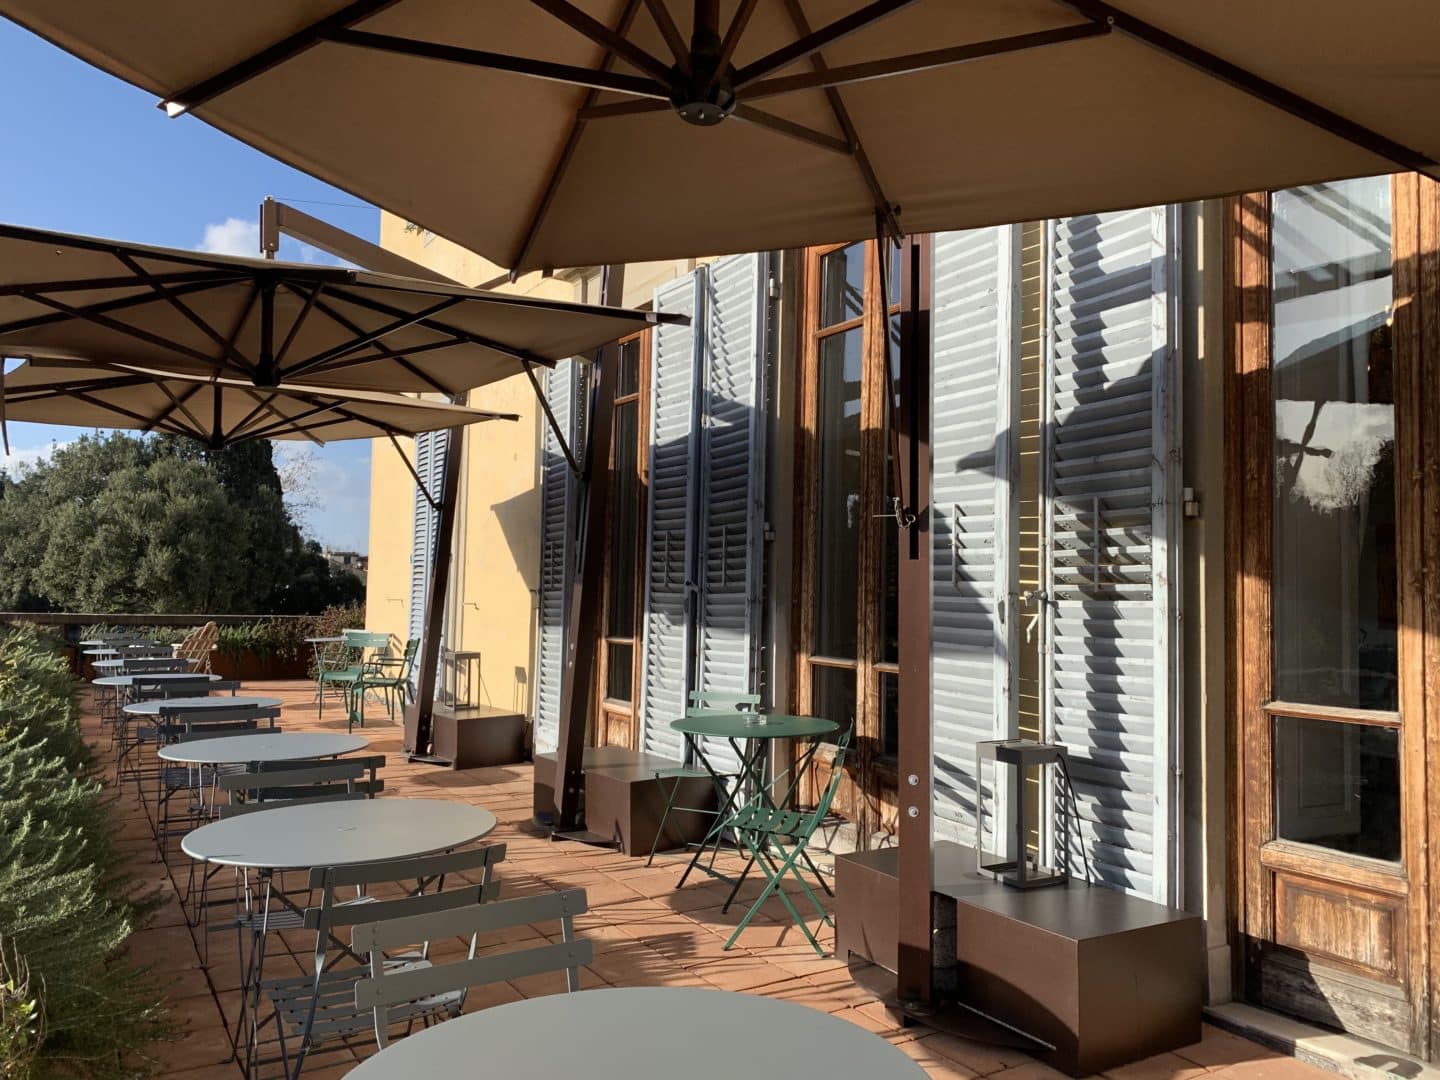 AdAstra Hotel Particulier Florence: A Review